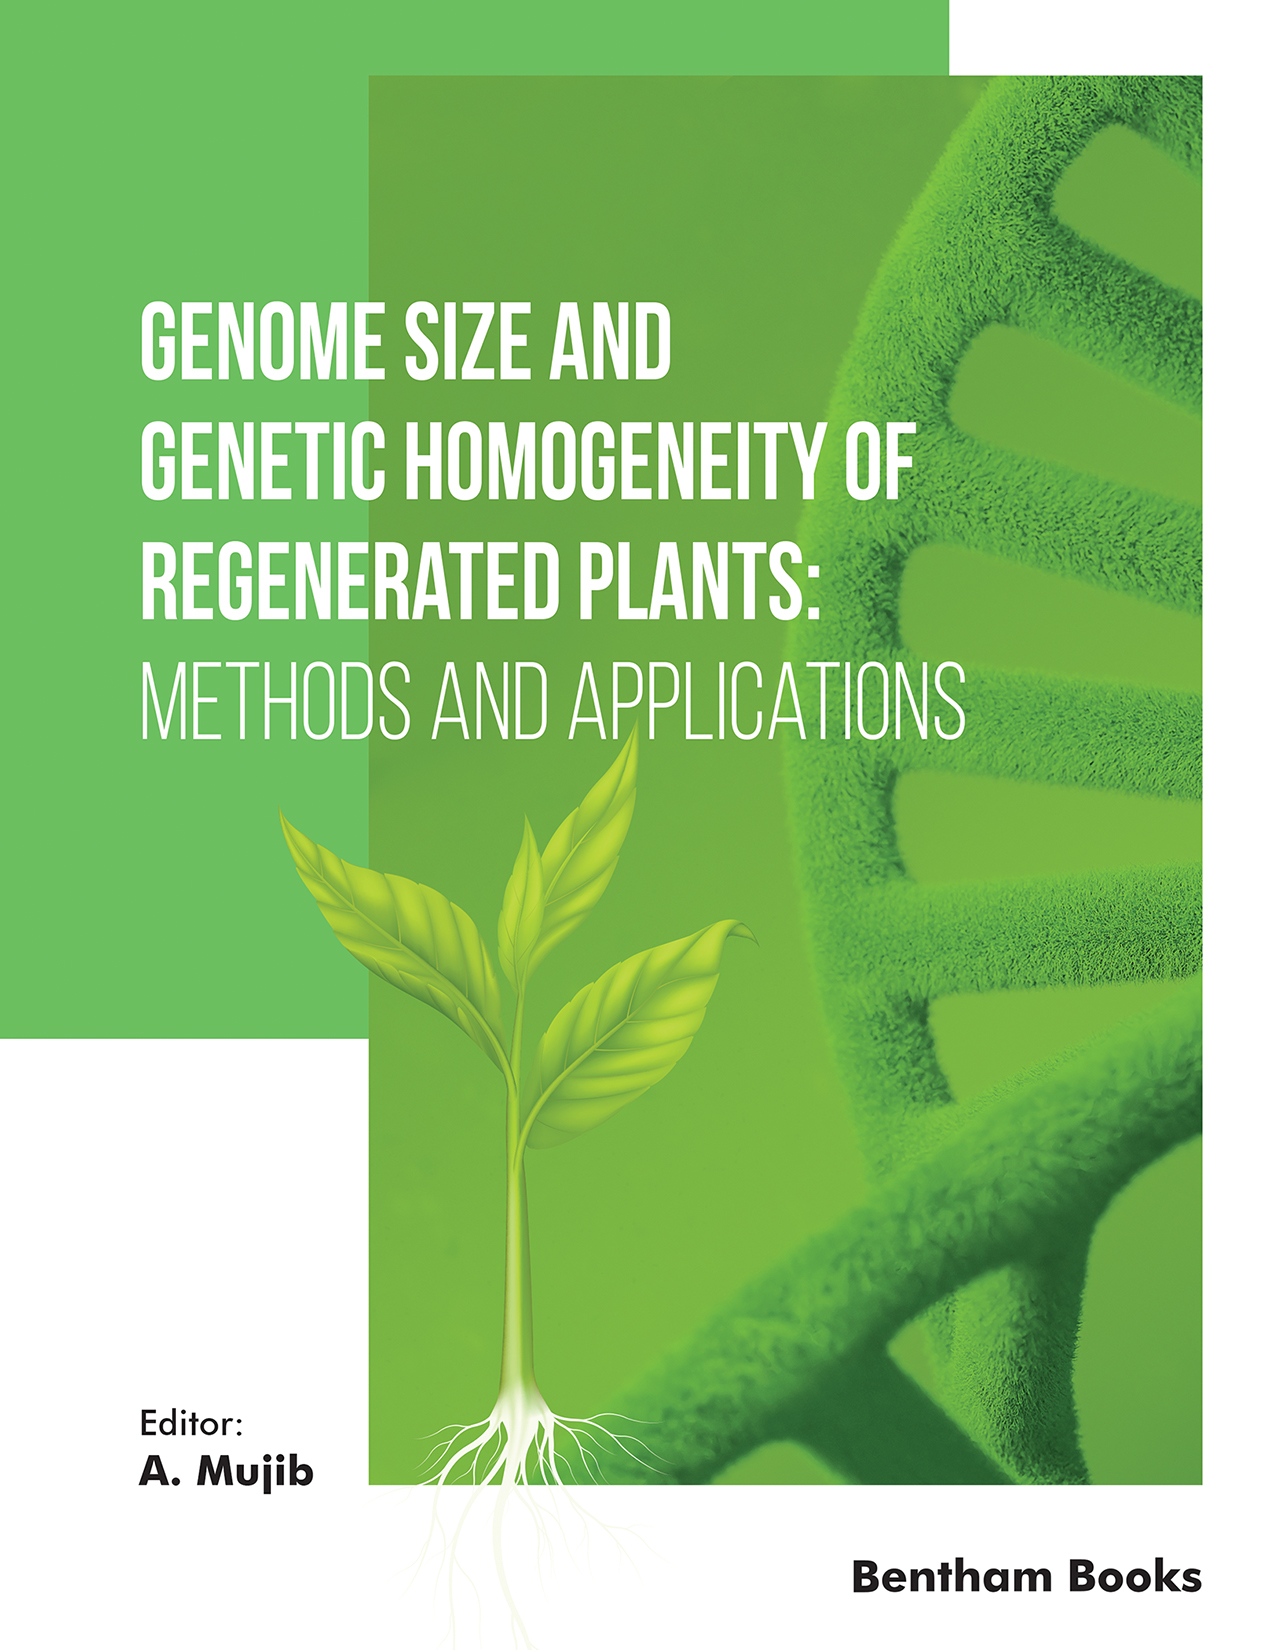 Genome Size and Genetic Homogeneity of Regenerated Plants: Methods and Applications